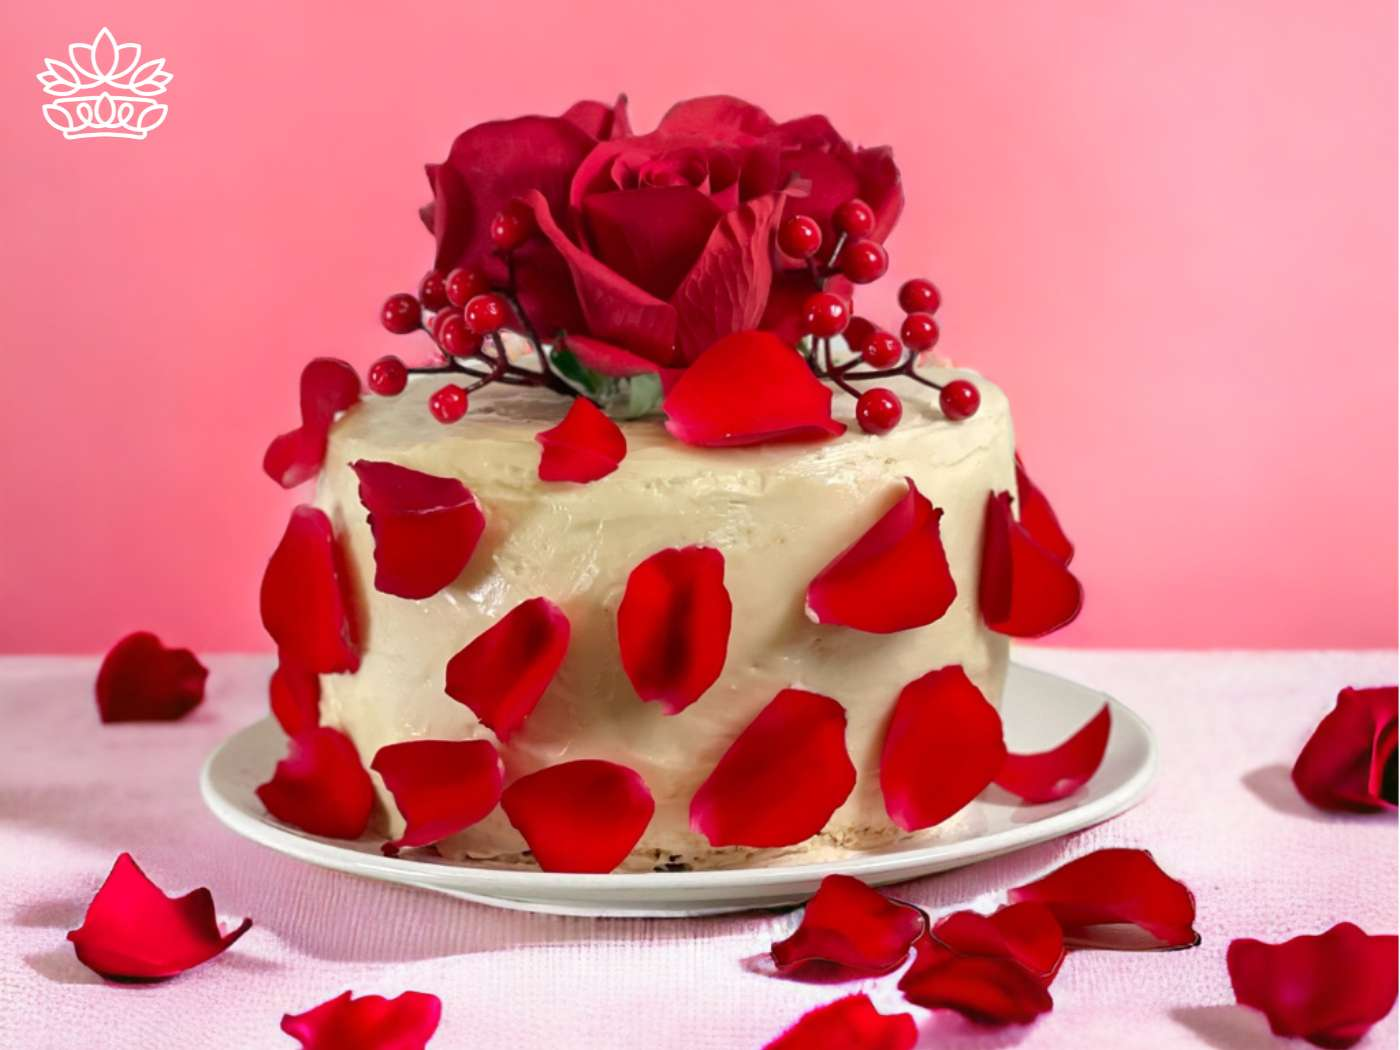 An elegant cake topped with a deep red rose and berries, with vibrant rose petals scattered around, epitomizing the romantic and luxurious edible creations from Fabulous Flowers and Gifts.